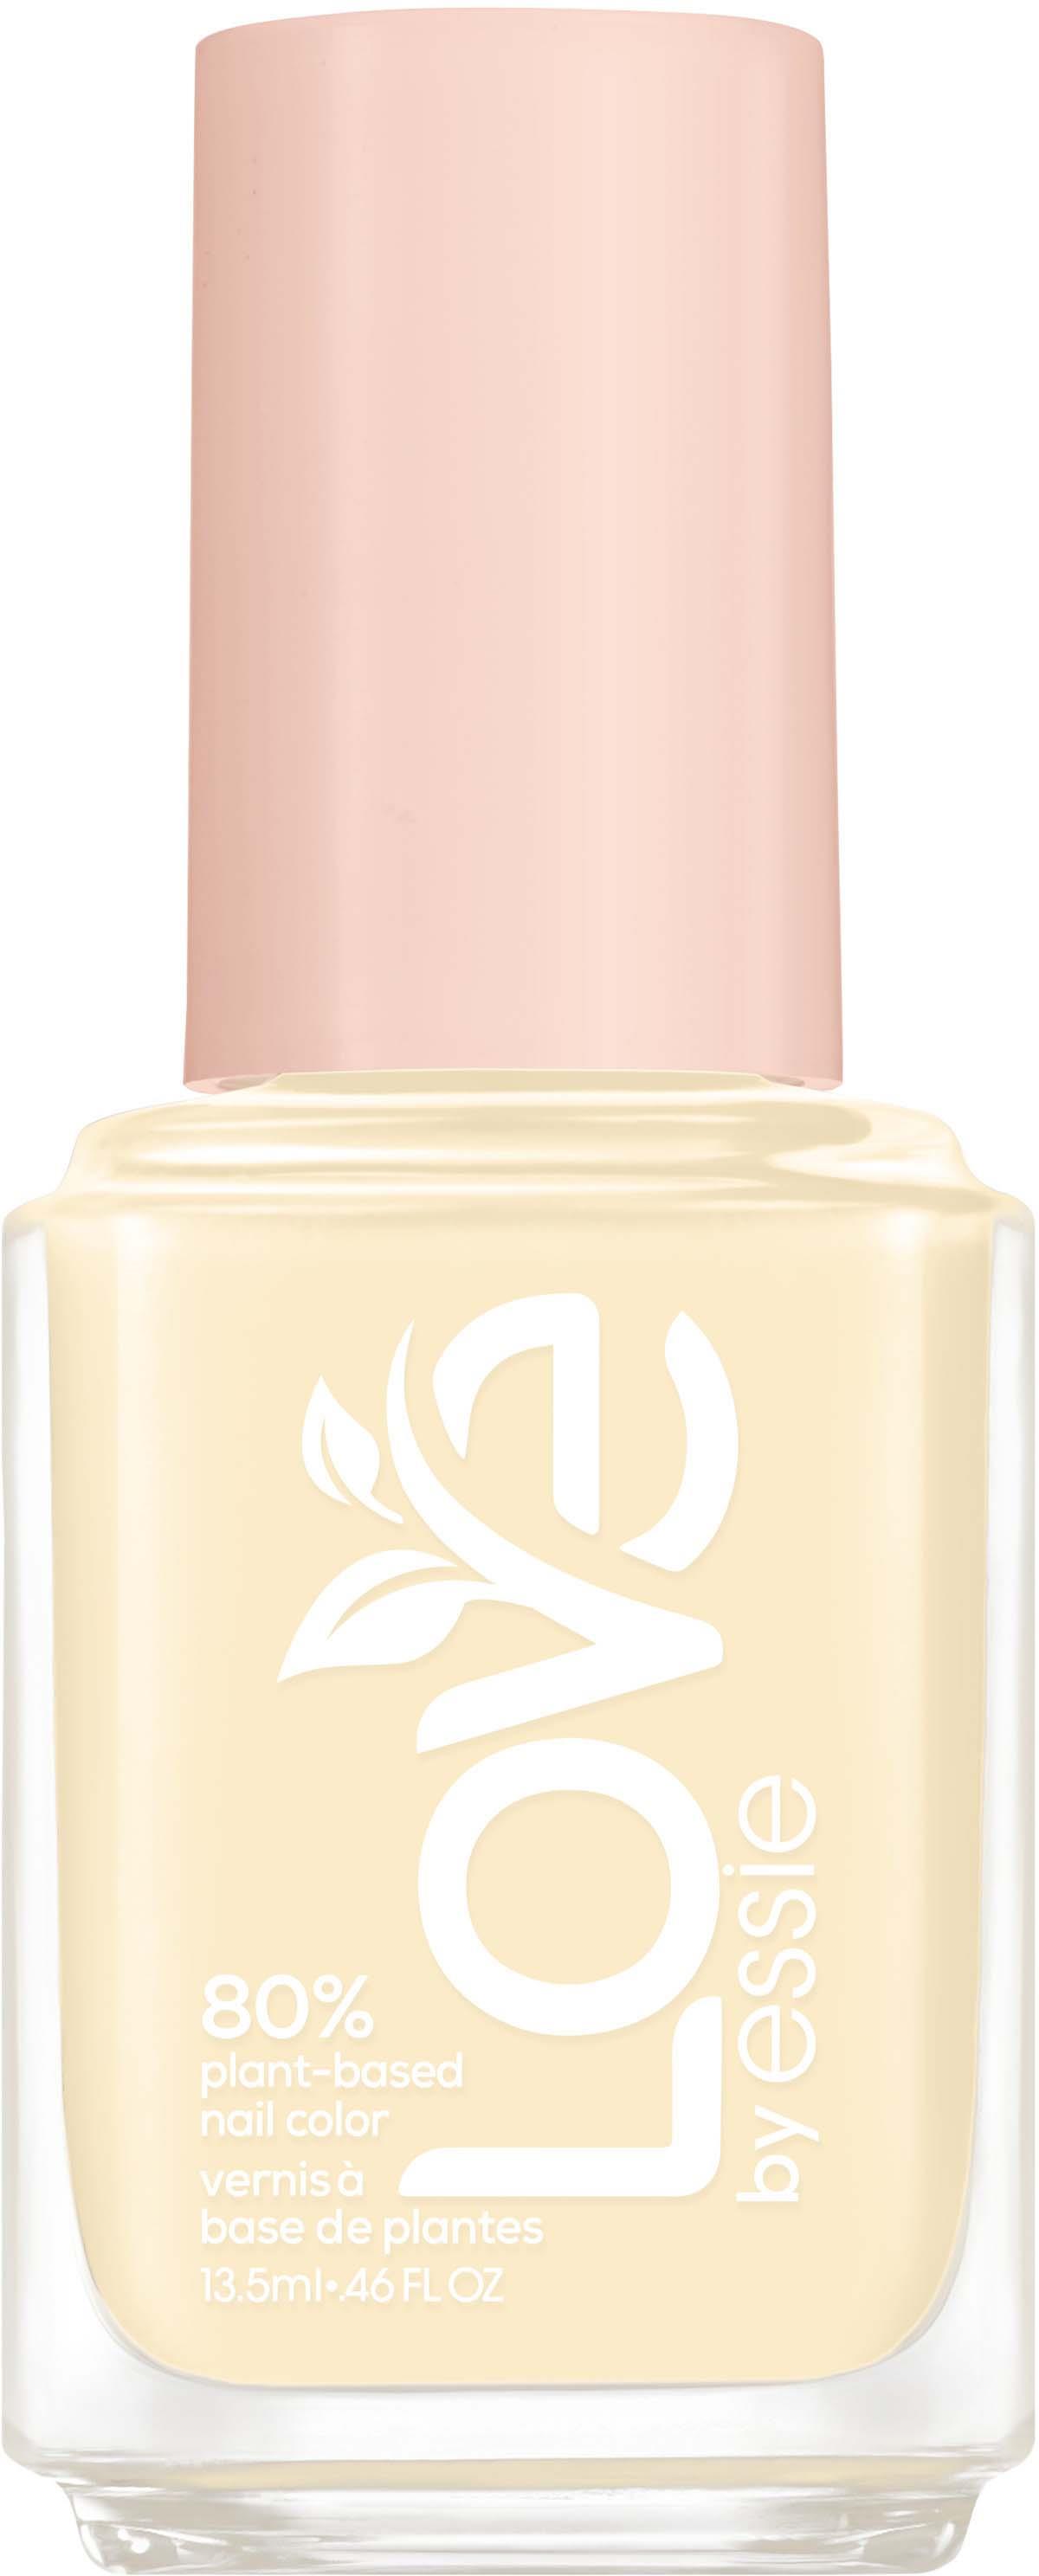 Essie LOVE Color Nail Plant-based Side On The 230 Essie 80% by Brighter